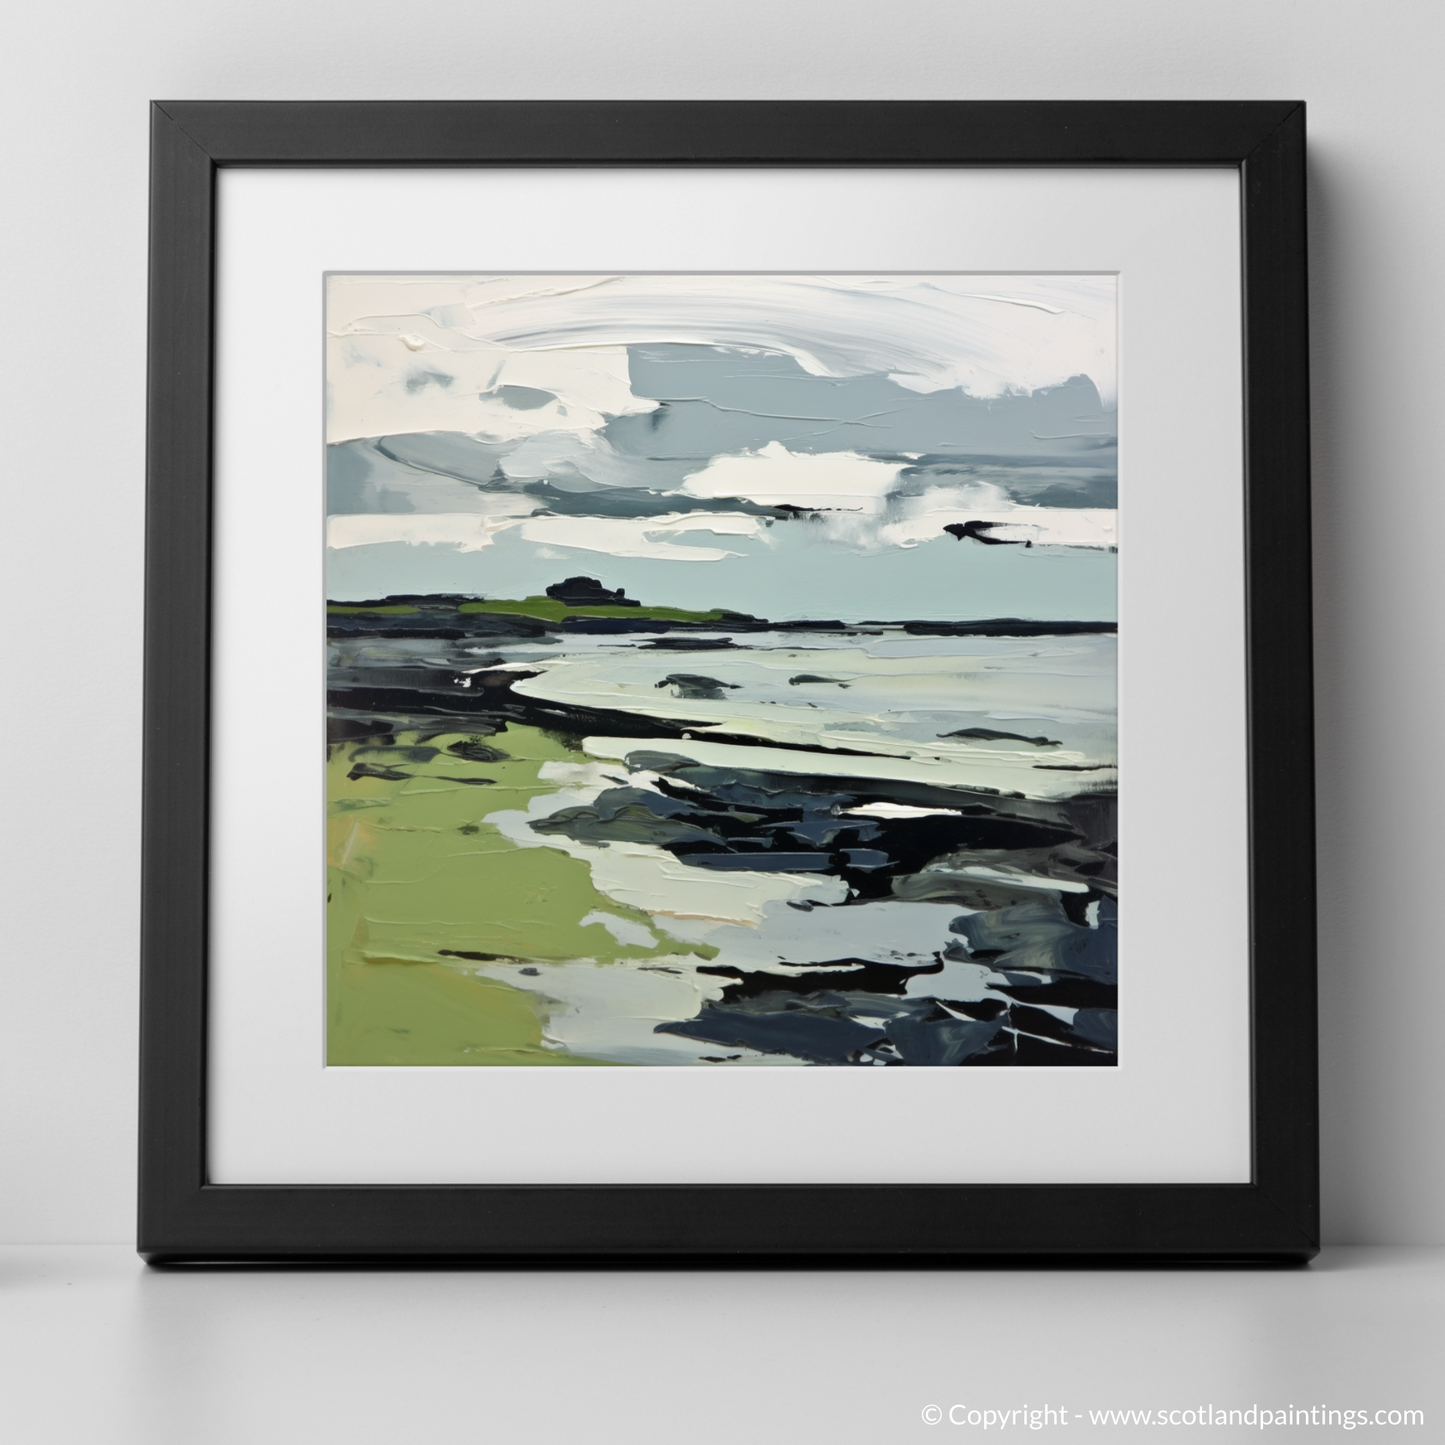 Art Print of Largo Bay, Fife with a black frame